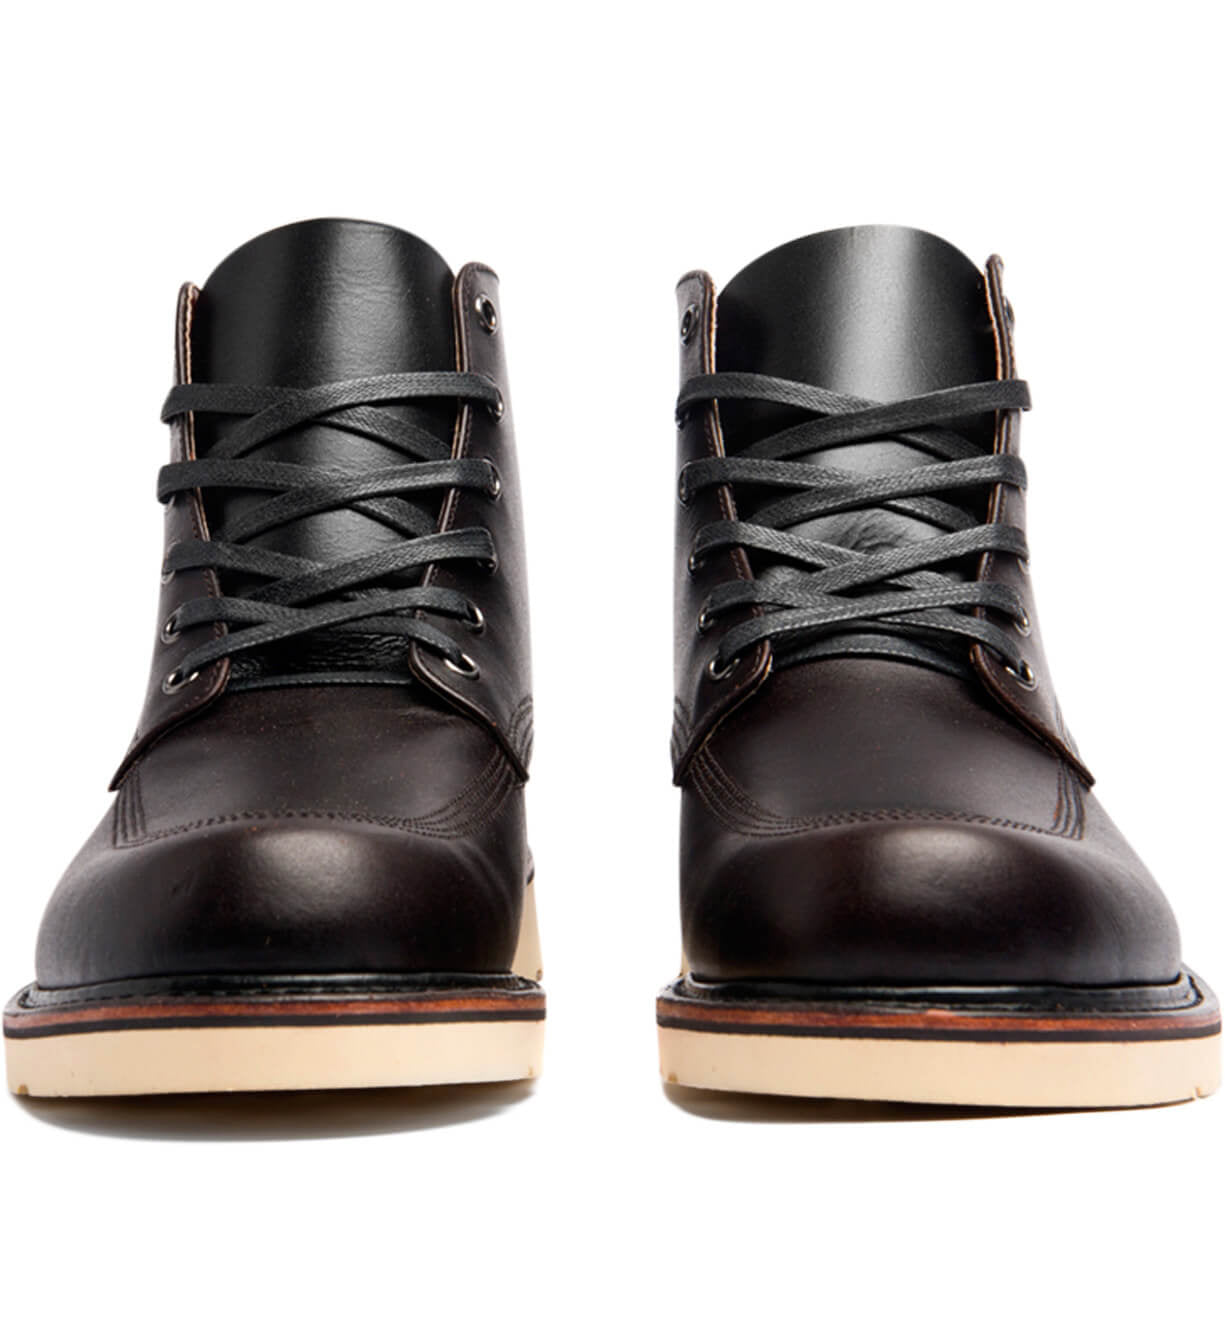 A pair of Broken Homme Jaime Boots, men's leather work boots with laces, designed for a comfortable fit.